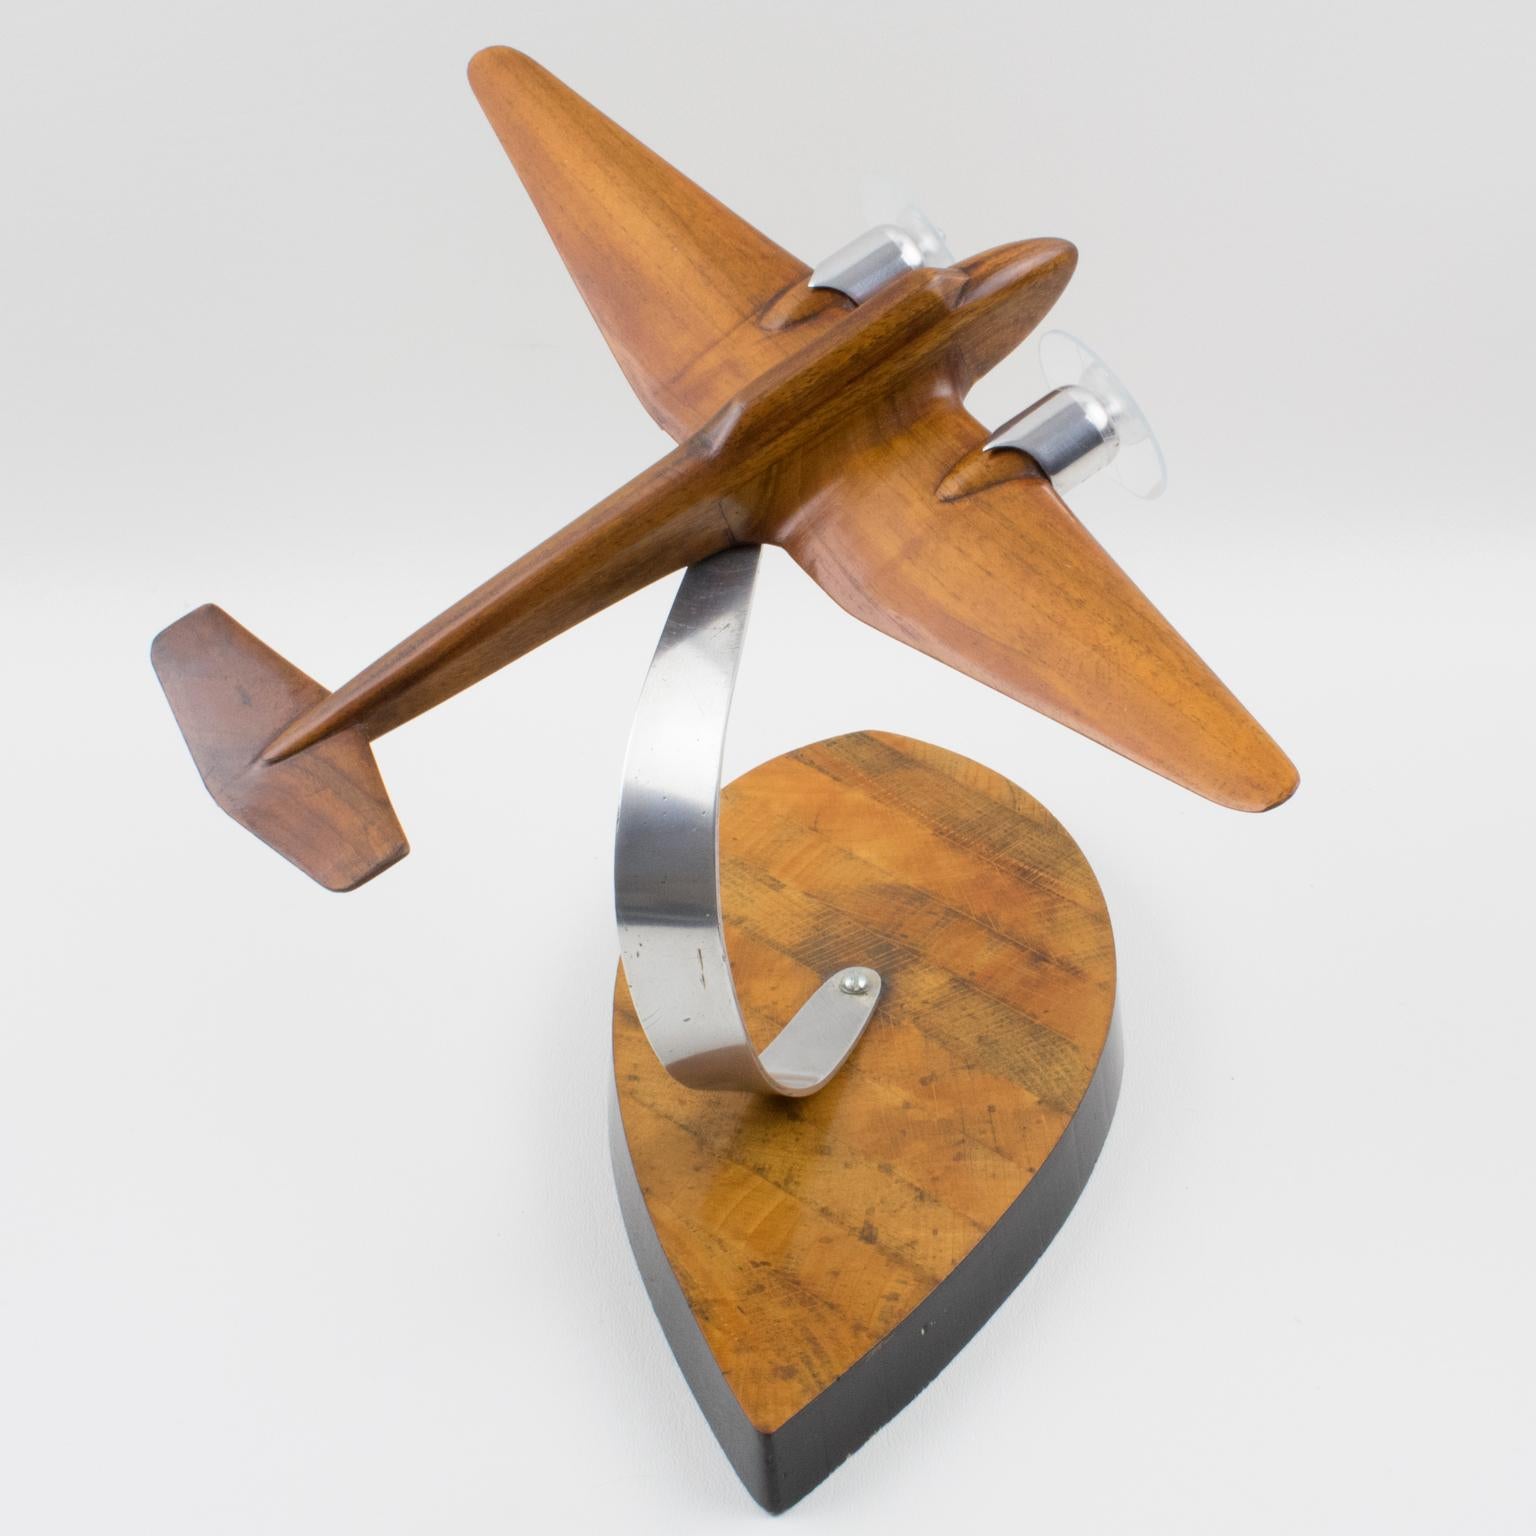 French Art Deco, 1940s Wooden and Aluminum Airplane Aviation Model 4